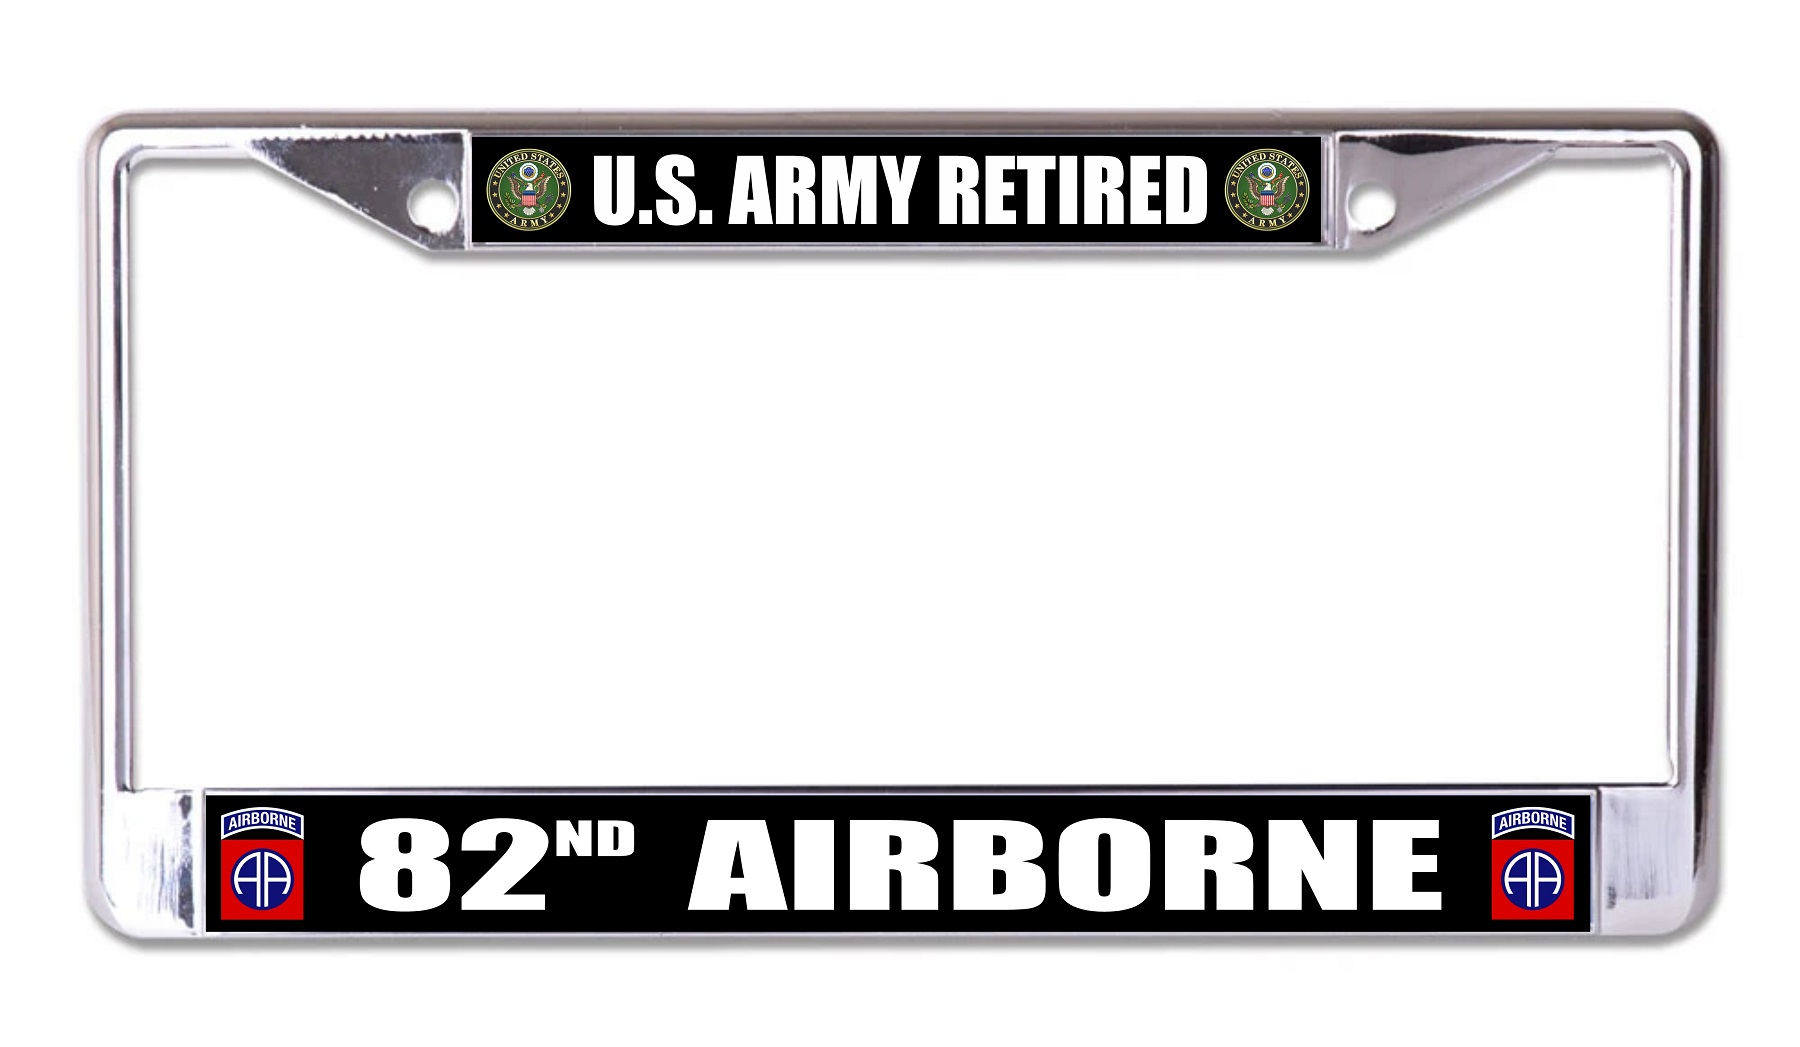 License Plates Online U.S. Army Retired 82nd Airborne Chrome License Plate Frame